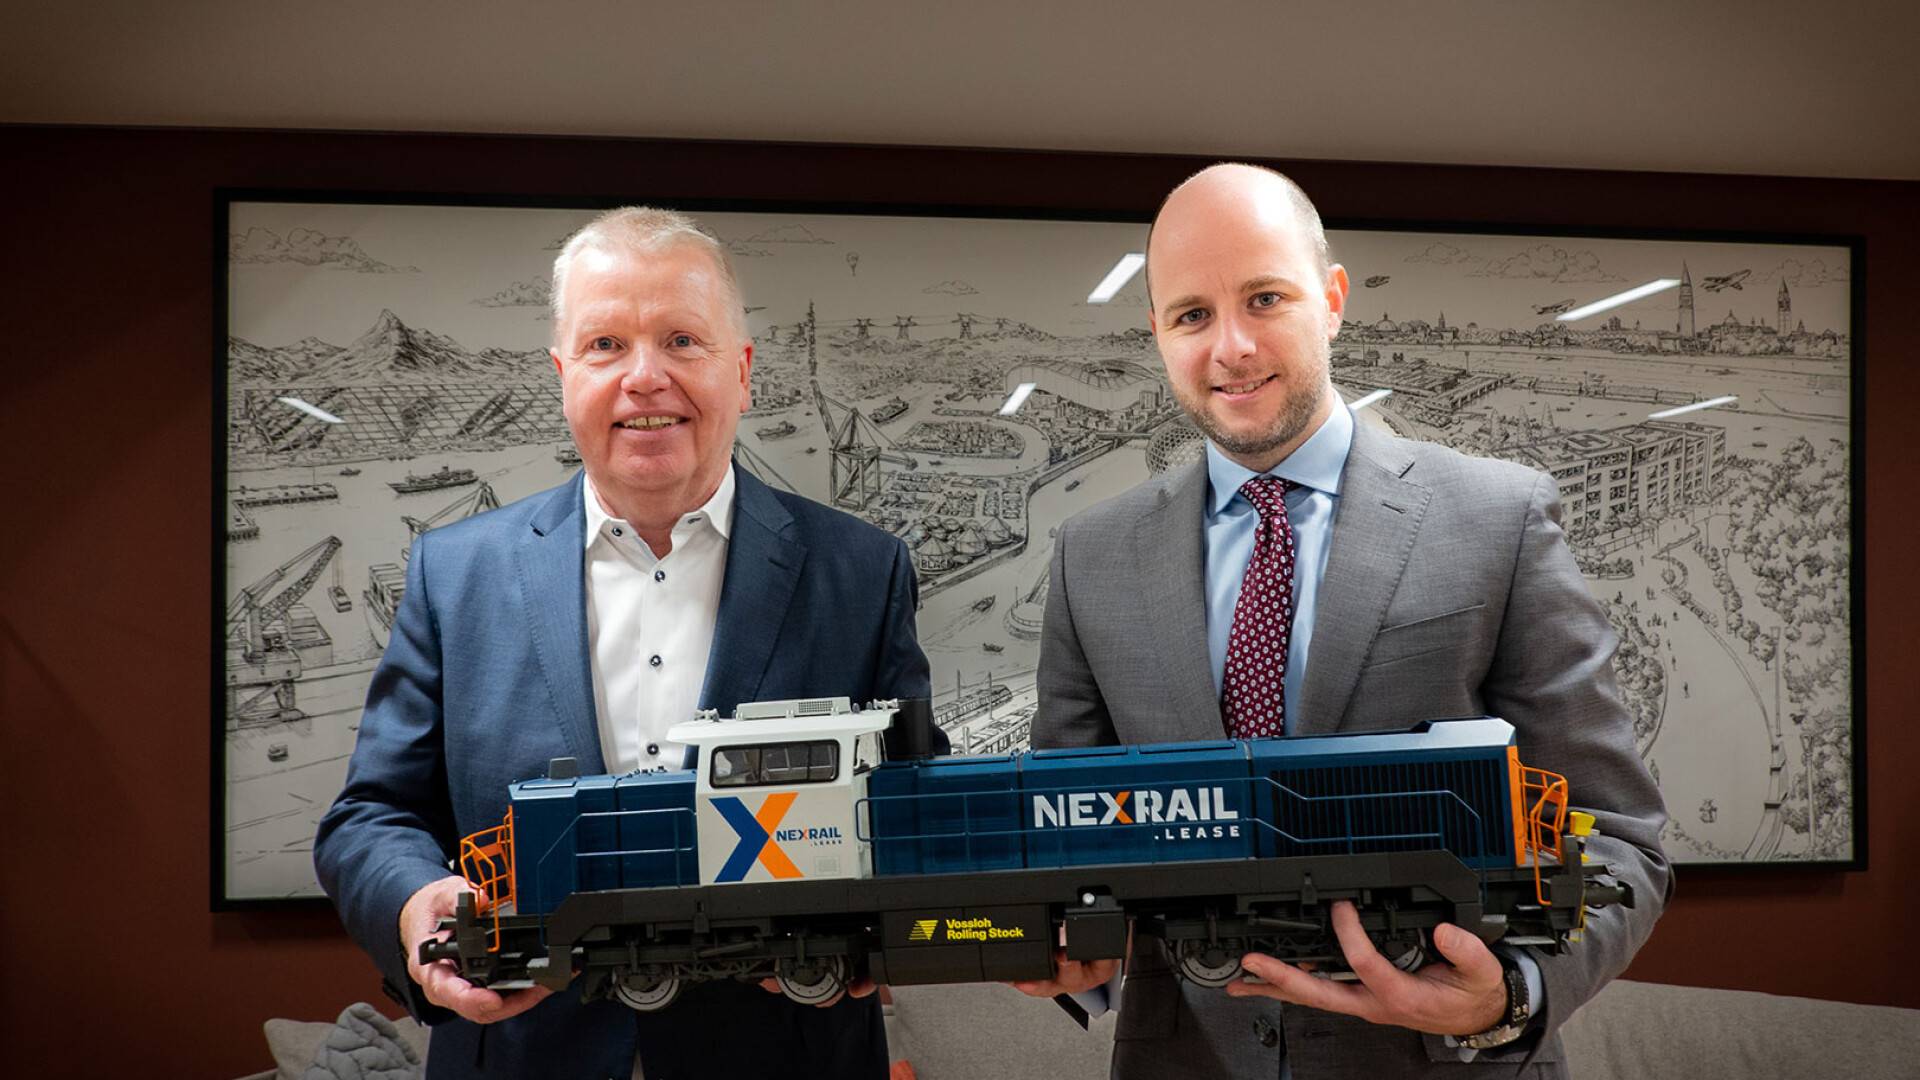 ENGLISH – Nexrail is expanding its leasing business